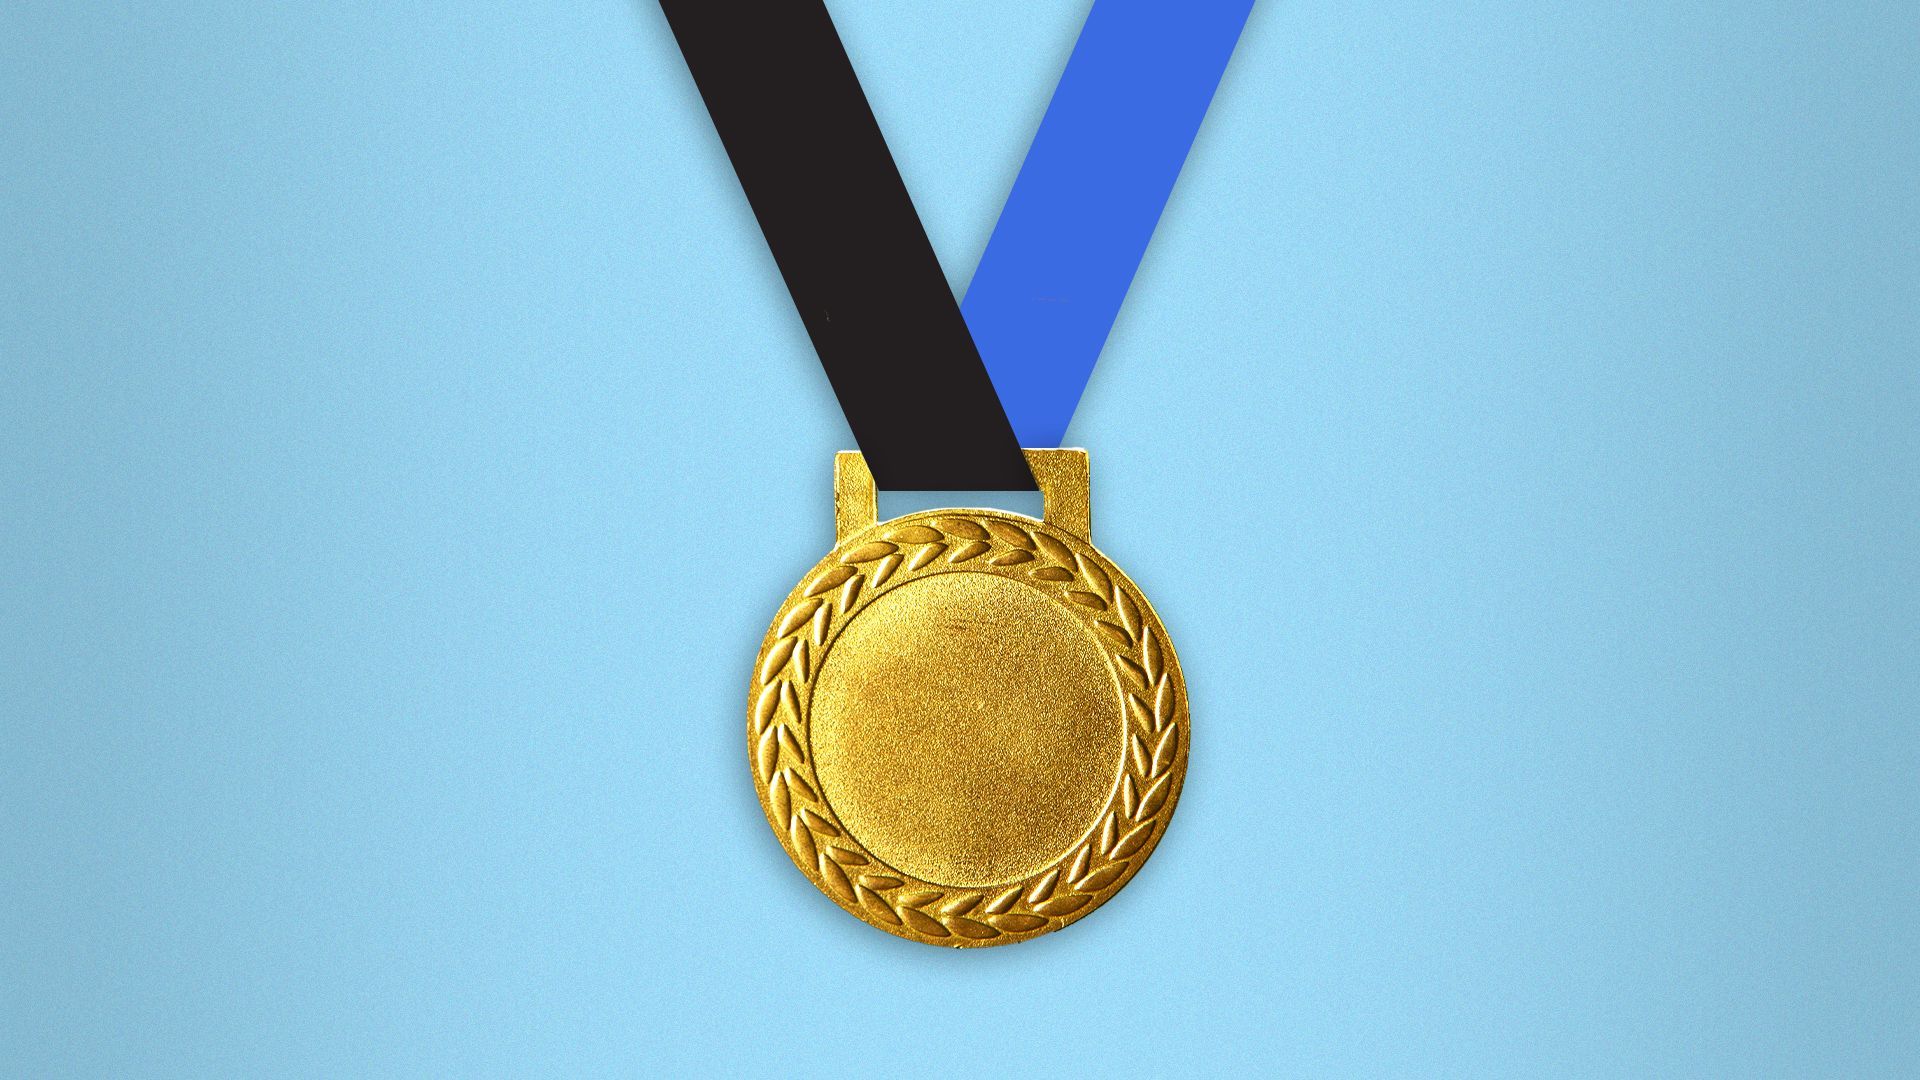 Illustration of an award medal with the Axios "A" making the neck ribbons.